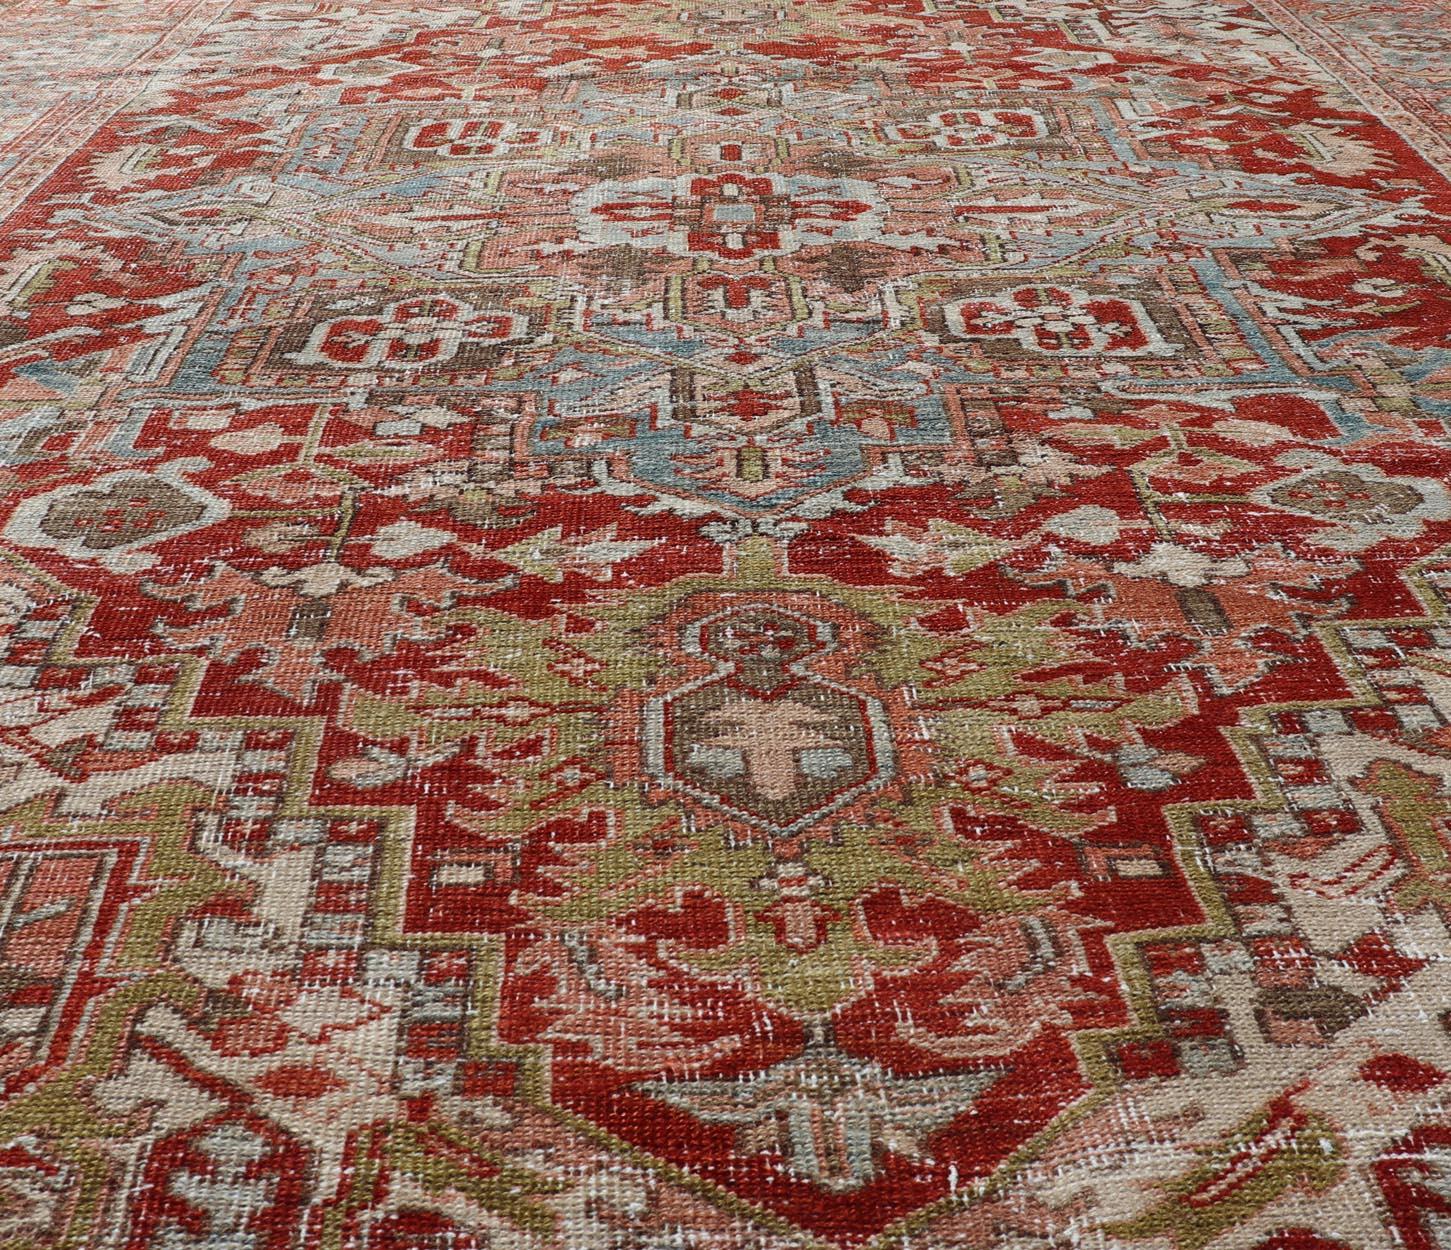 Antique Persian Heriz Rug With Geometric Medallion Design in Red & Soft Colors For Sale 2